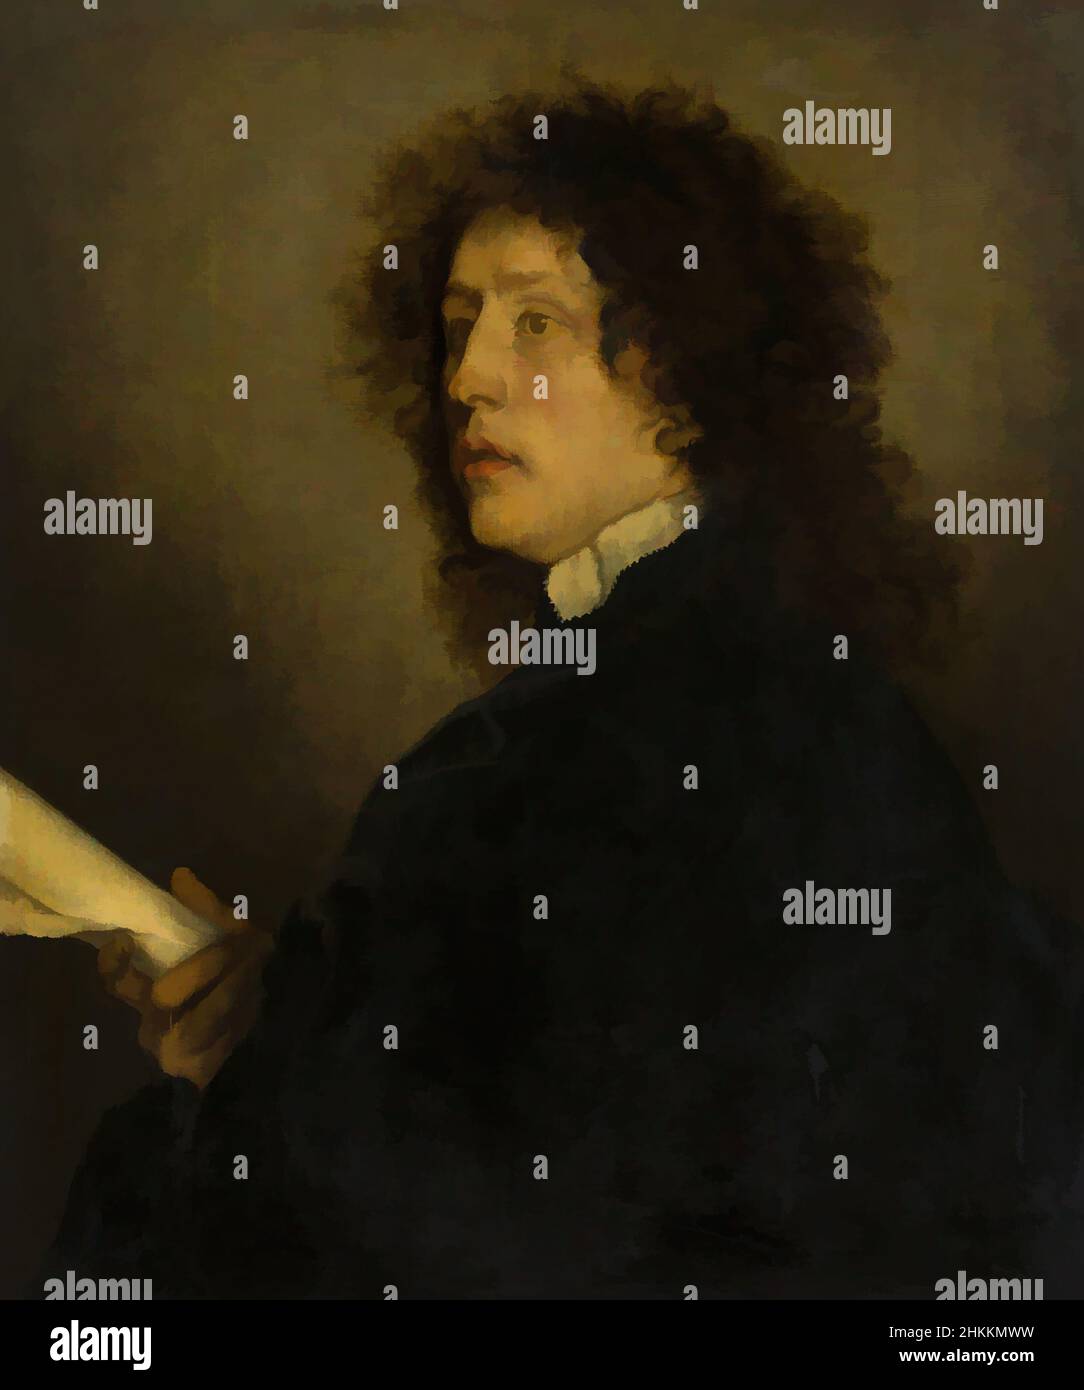 Art inspired by Portrait of a man, Adriaen Hanneman, c. 1637, Classic works modernized by Artotop with a splash of modernity. Shapes, color and value, eye-catching visual impact on art. Emotions through freedom of artworks in a contemporary way. A timeless message pursuing a wildly creative new direction. Artists turning to the digital medium and creating the Artotop NFT Stock Photo